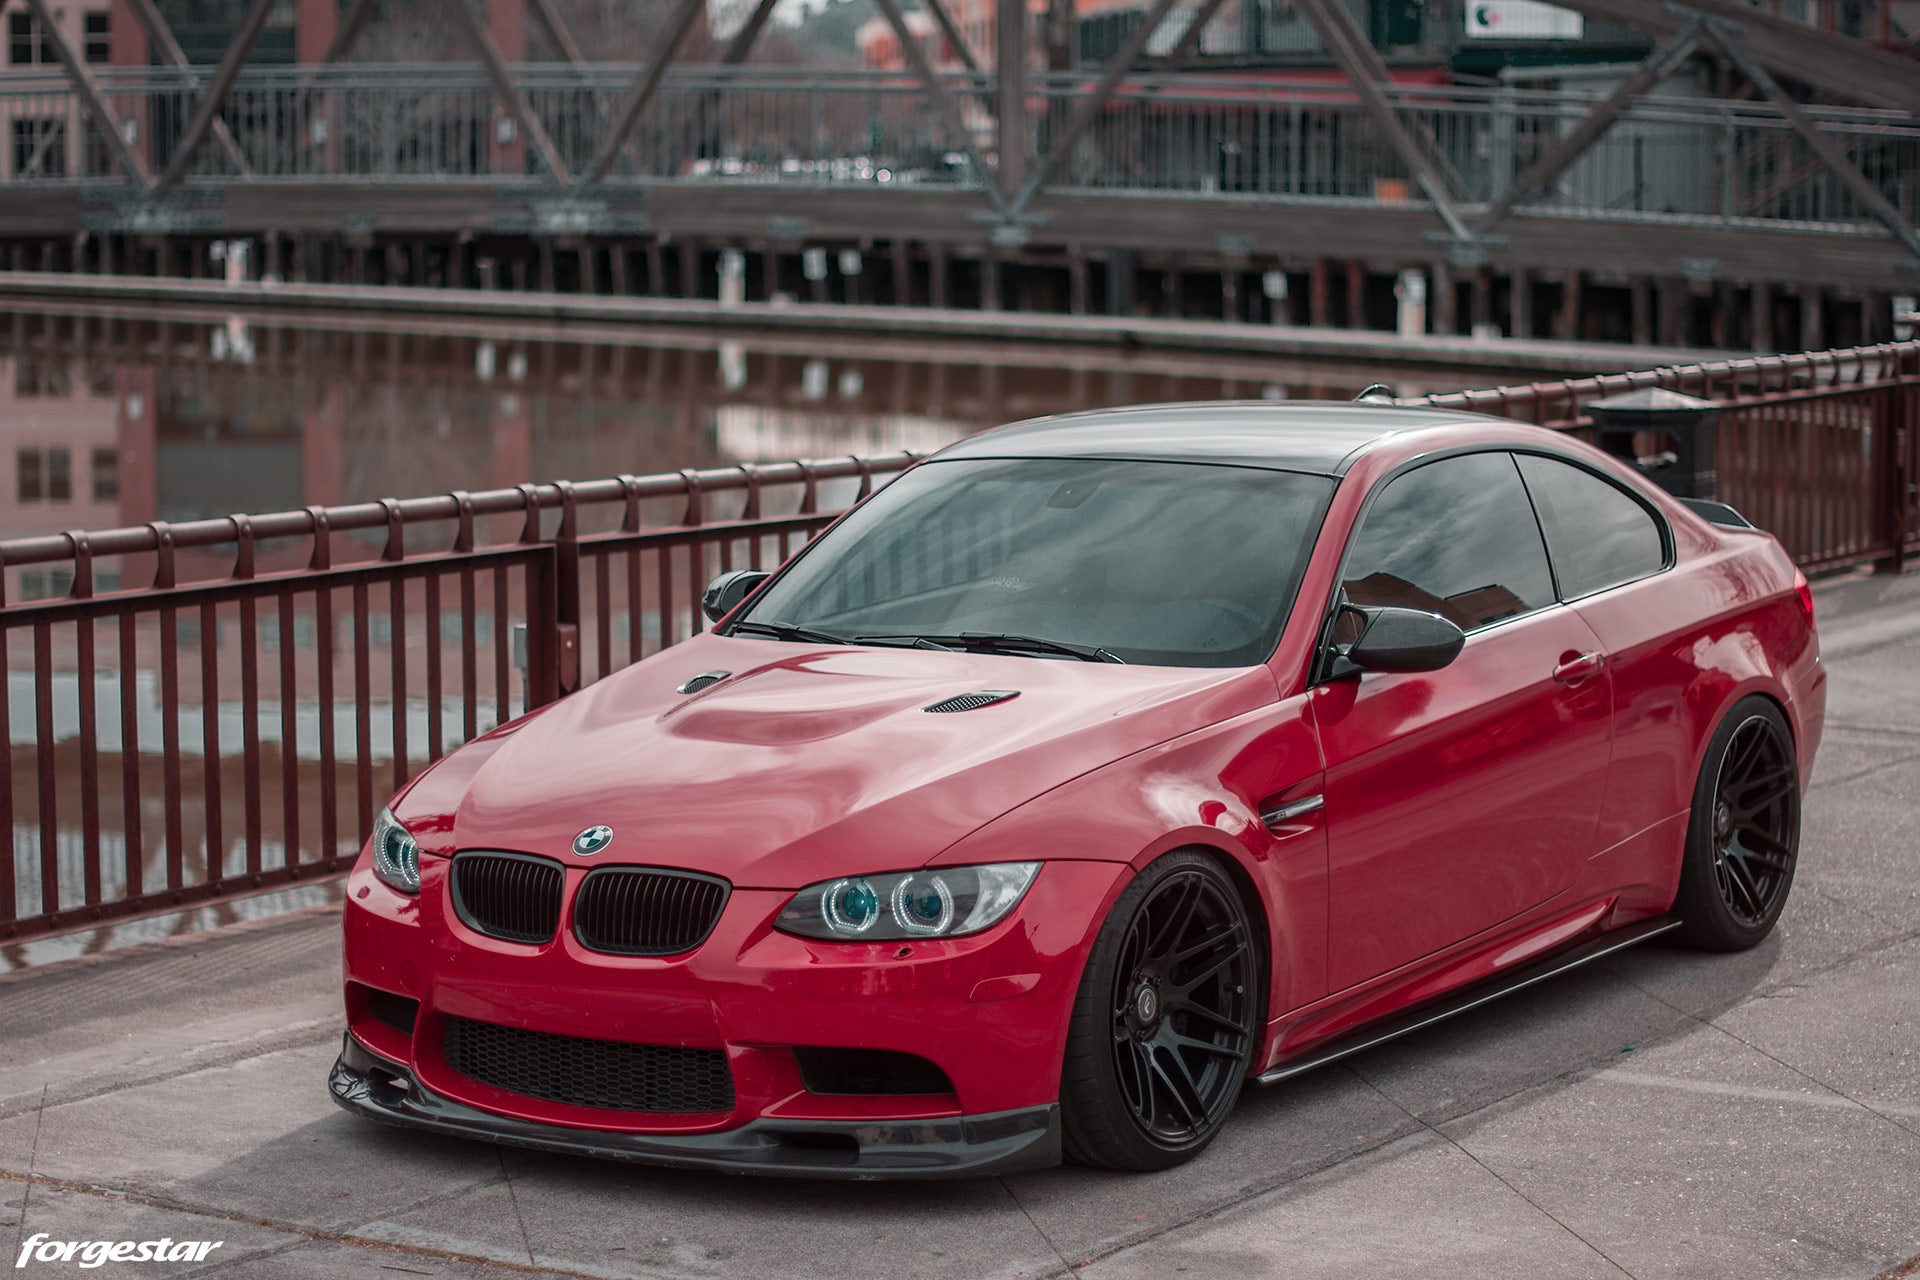 BMW E90 E91 E92 E93 M3 N54 N55 specs, news, and replacement parts